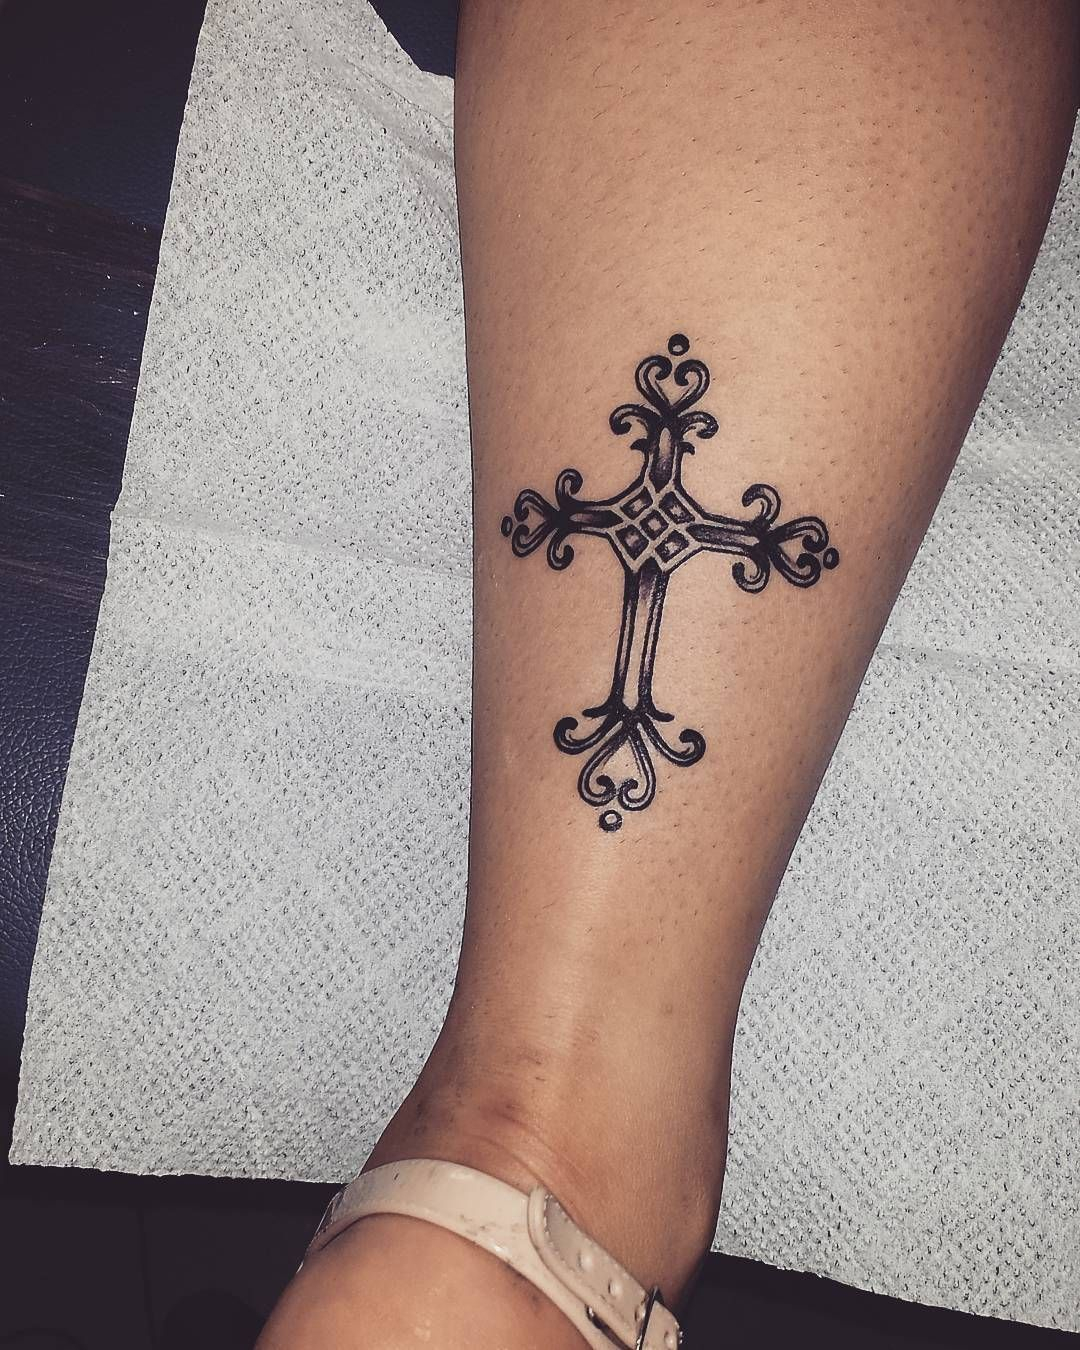 75 Unique Hottest Cross Tattoos Ideas Media Democracy intended for sizing 1080 X 1350